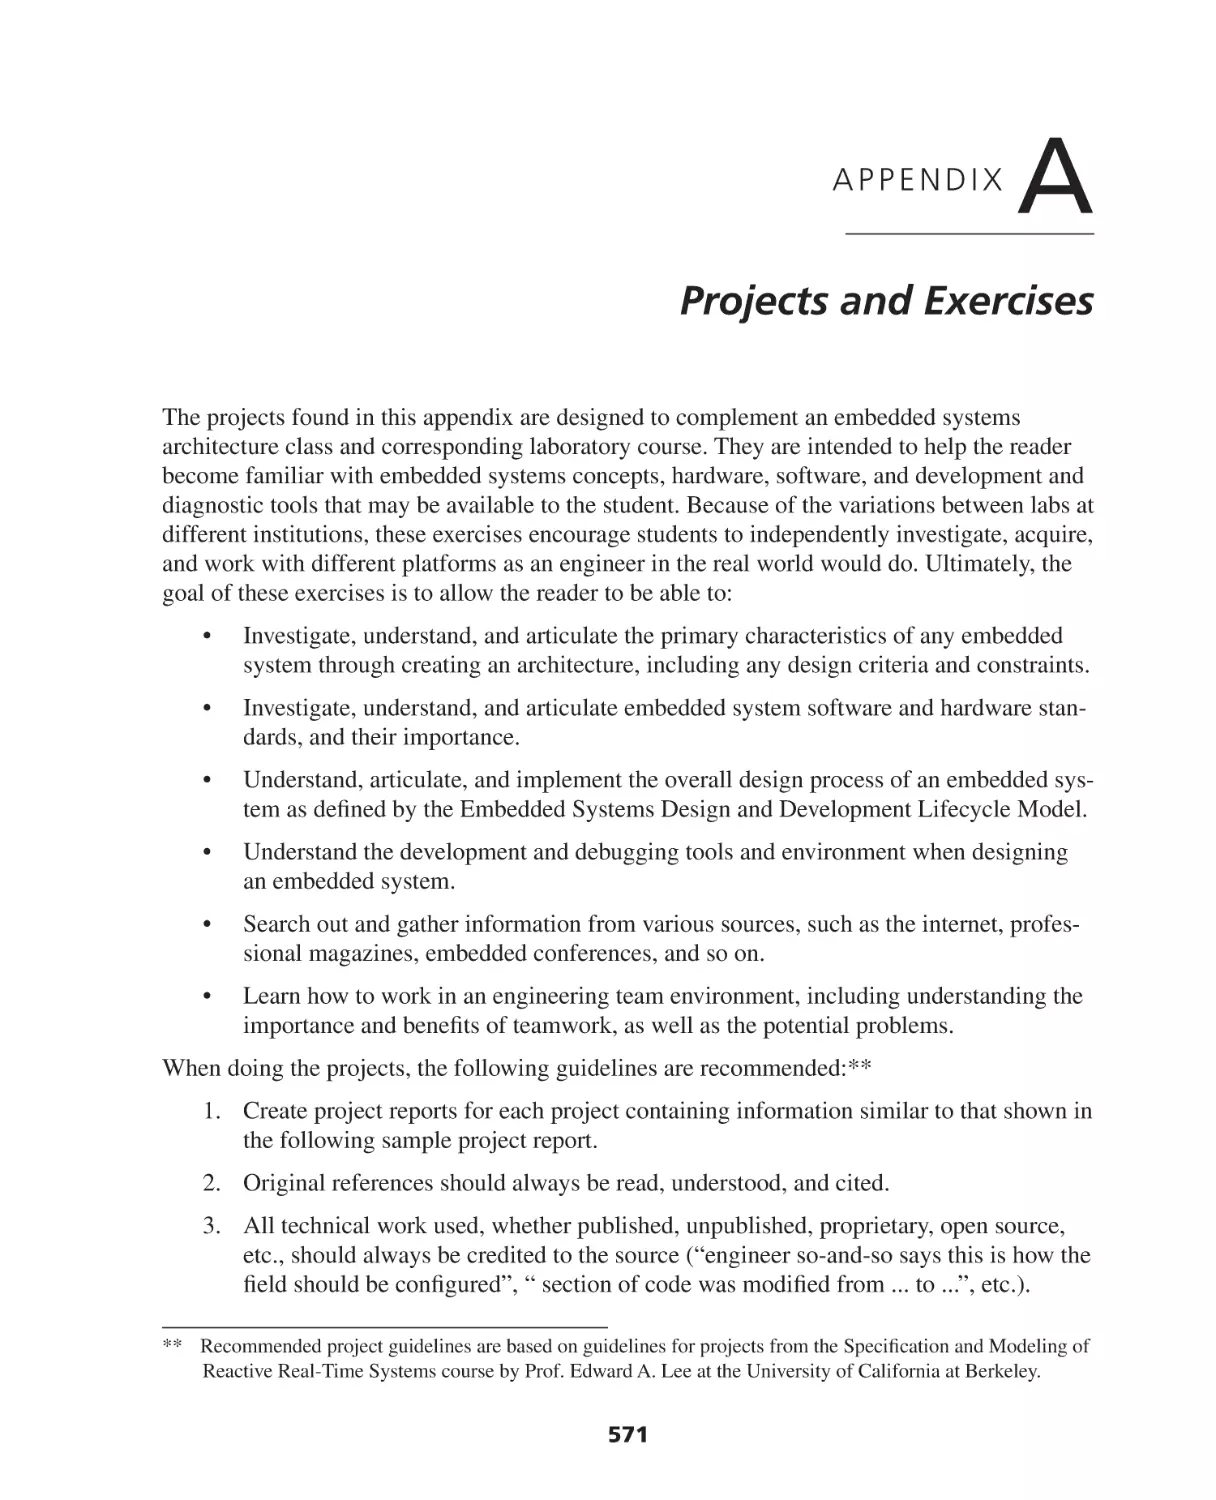 Appendix A. Projects and Exercises